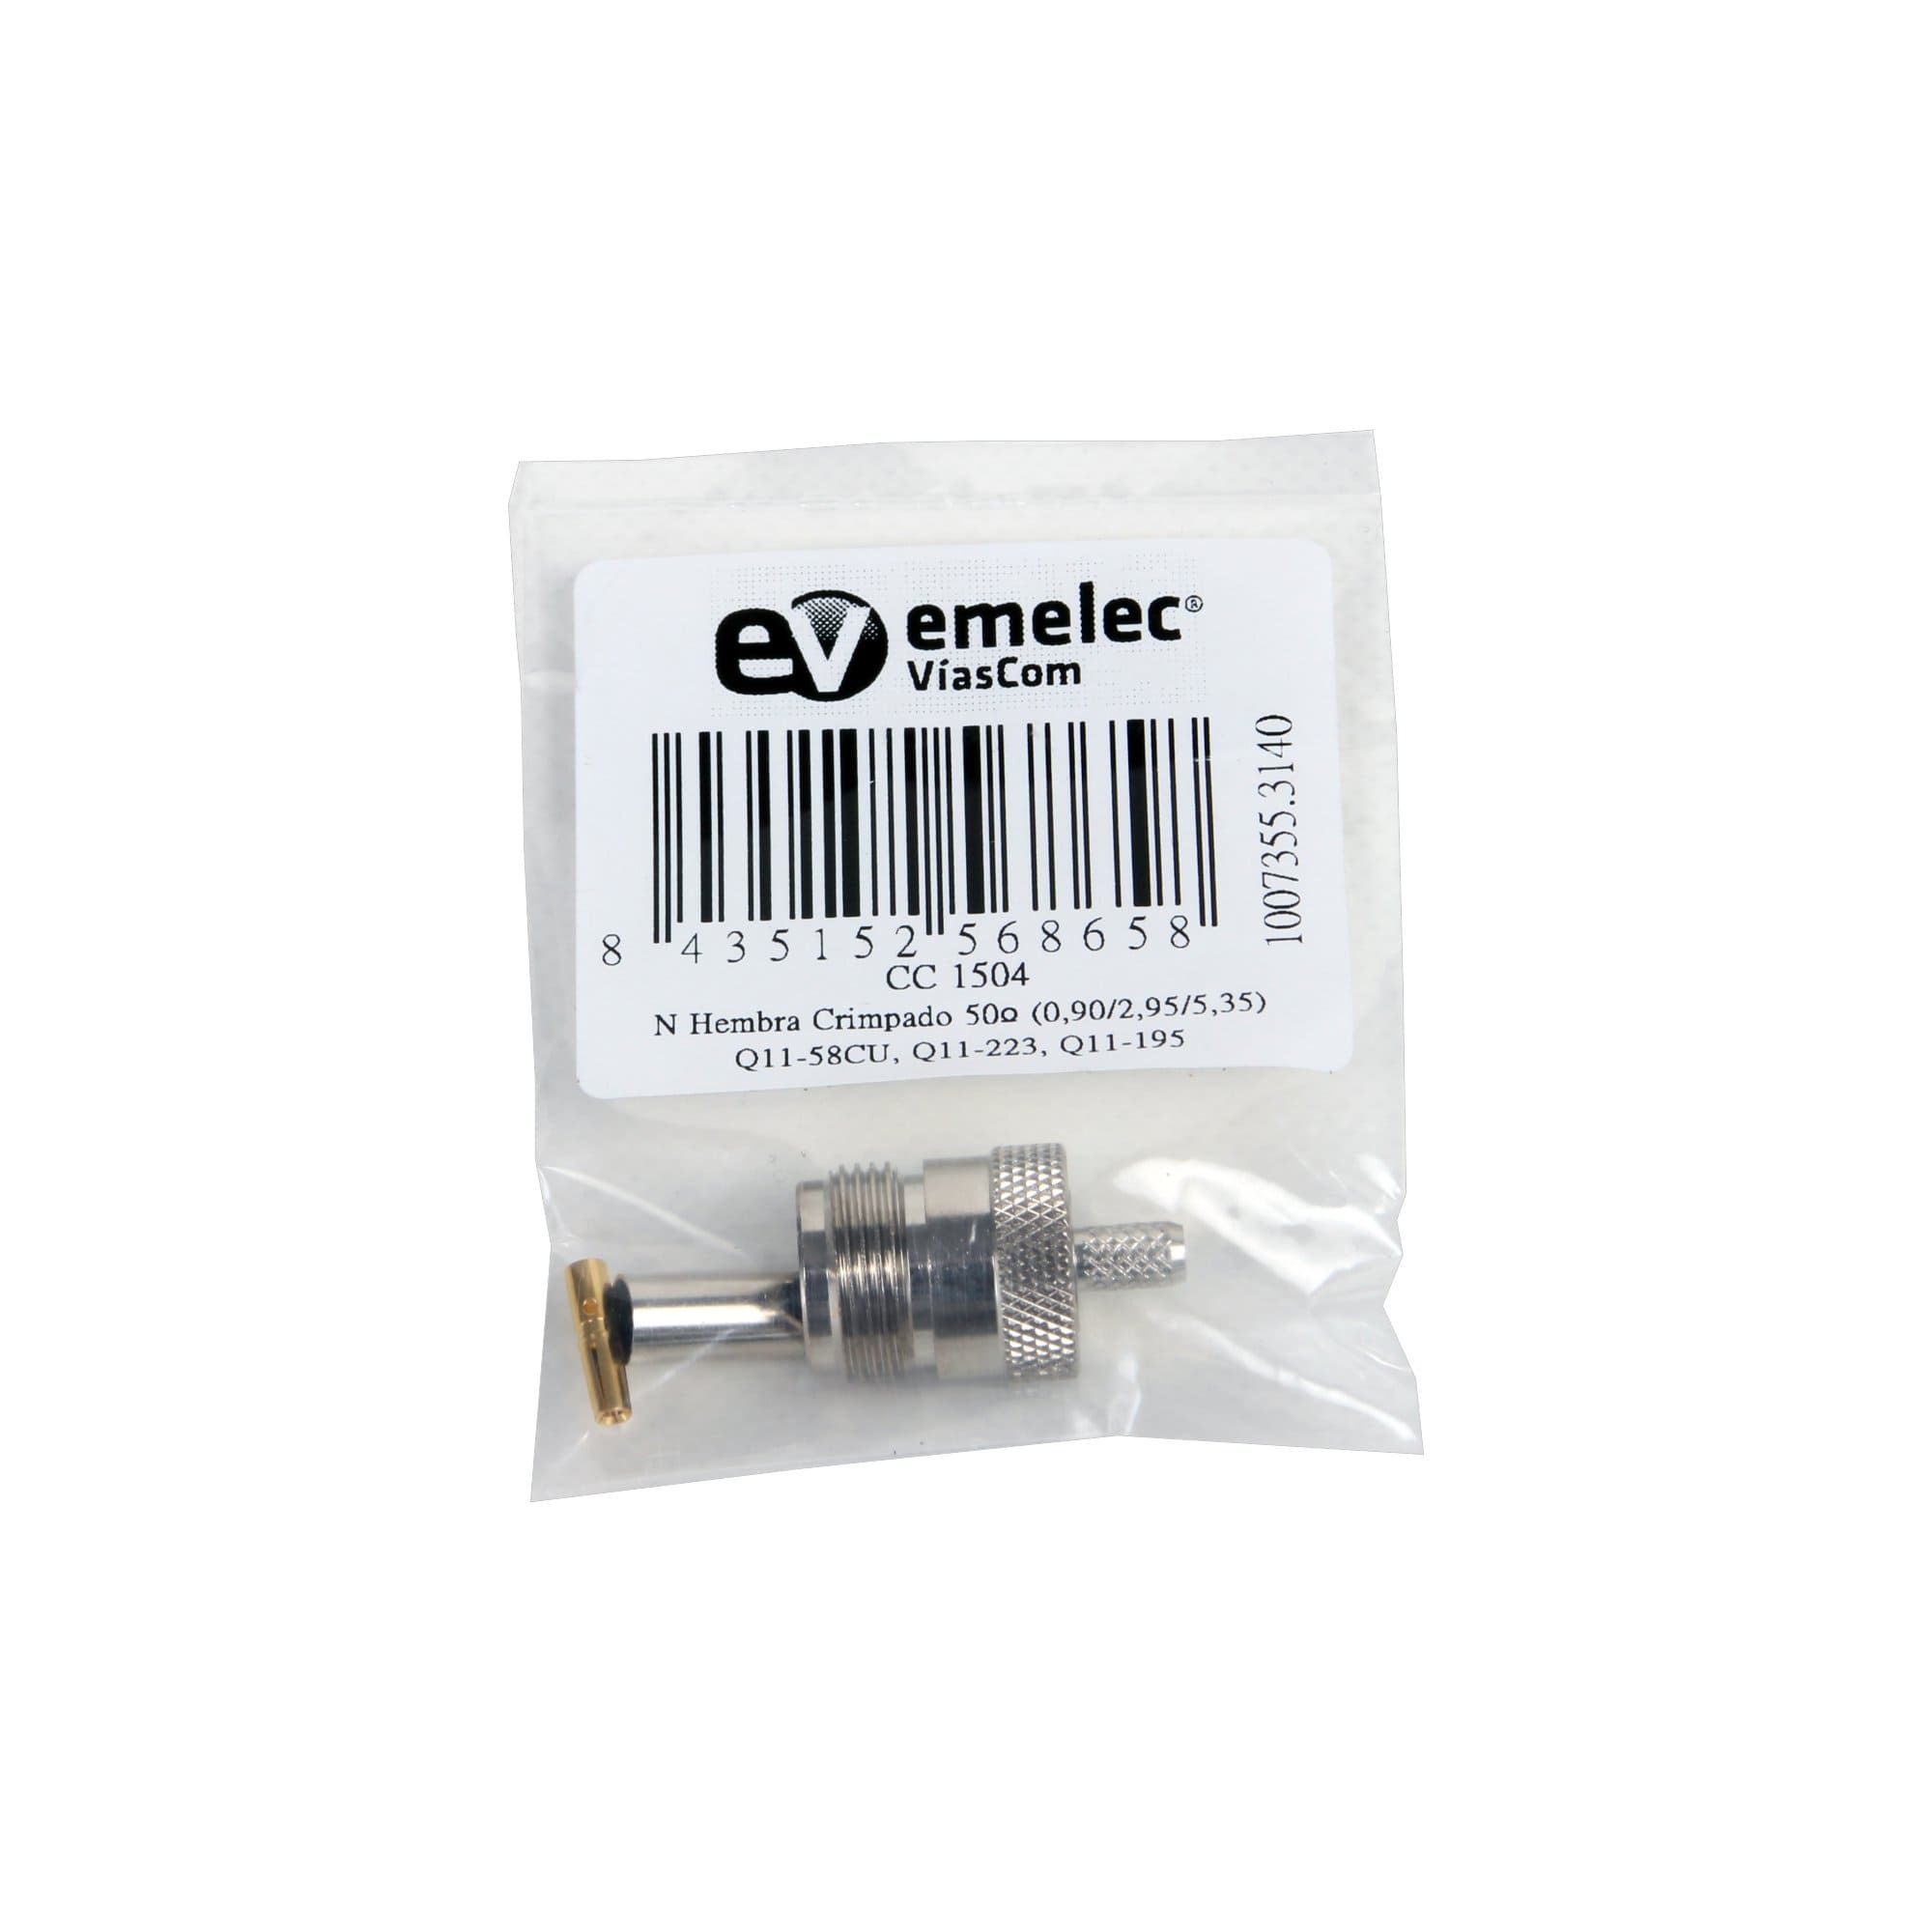 Bag with Coaxial N Female Crimp Connector 50 Ohms from Emelec VíasCom